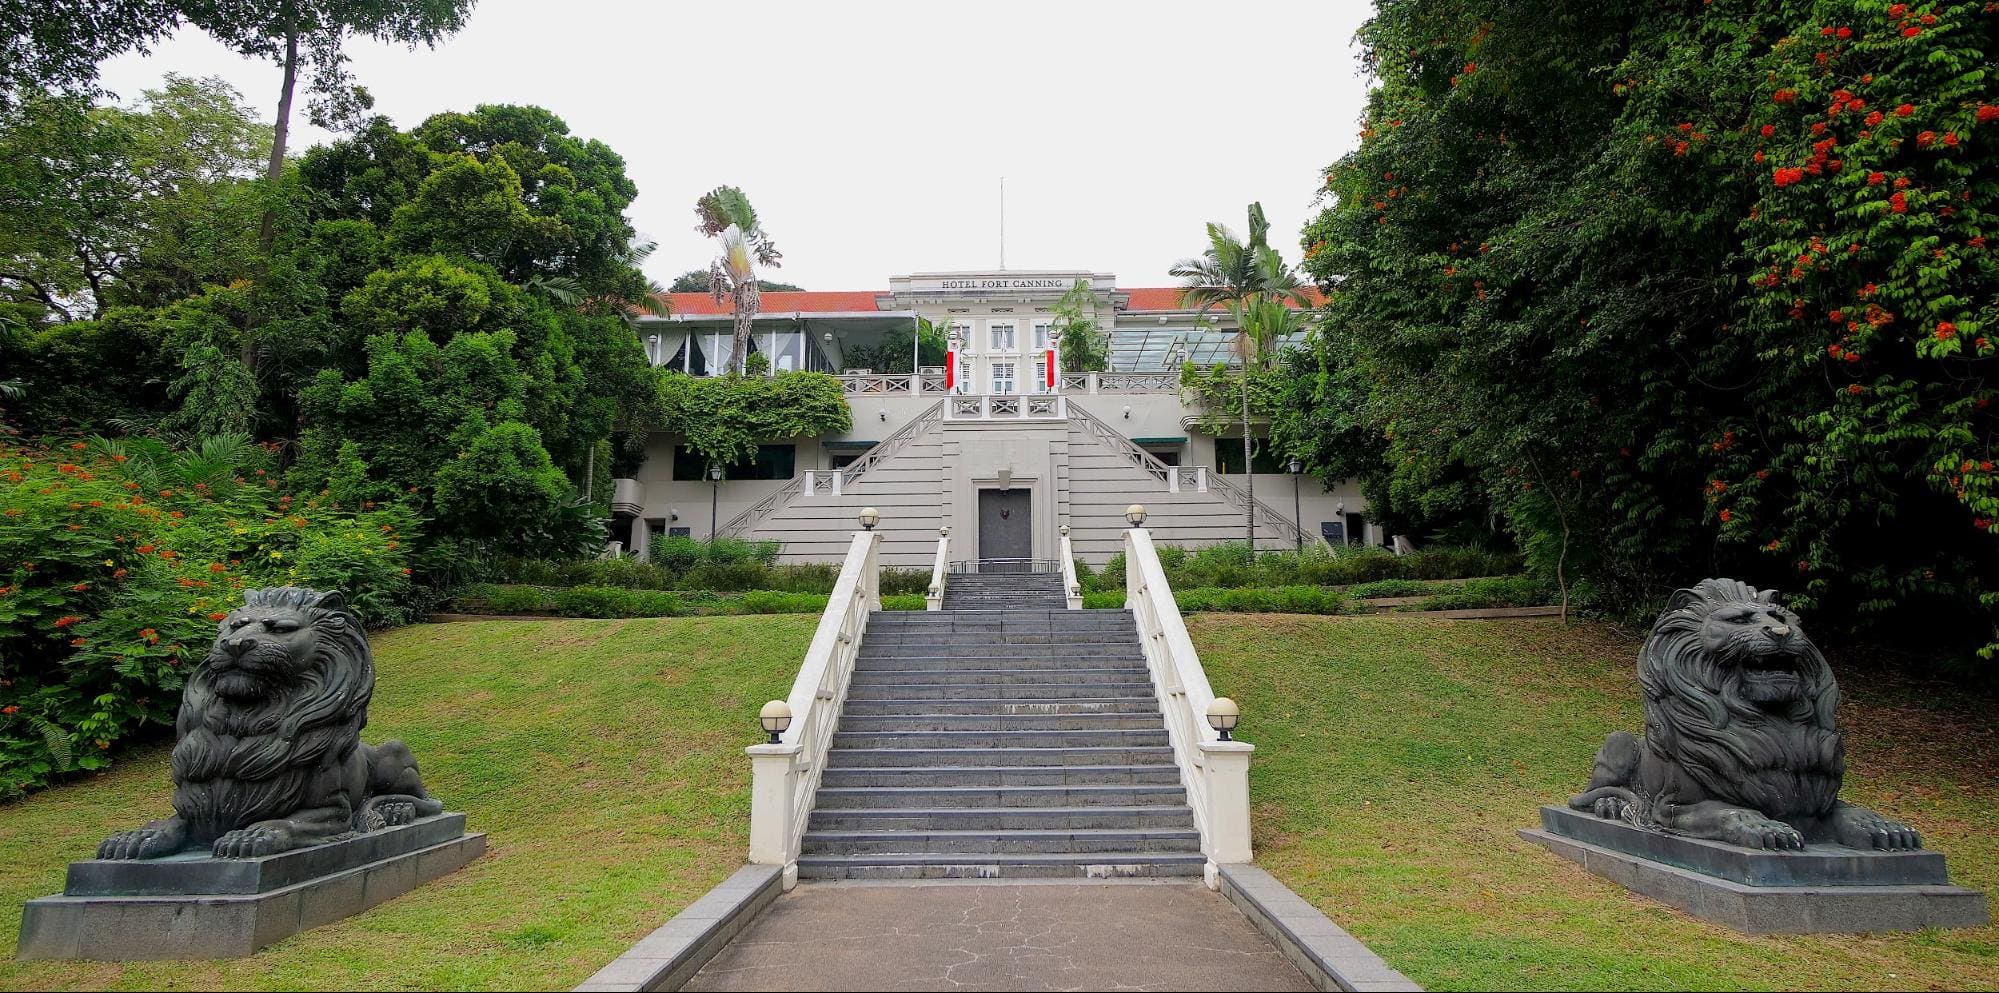 The grand entrance to Hotel Fort Canning